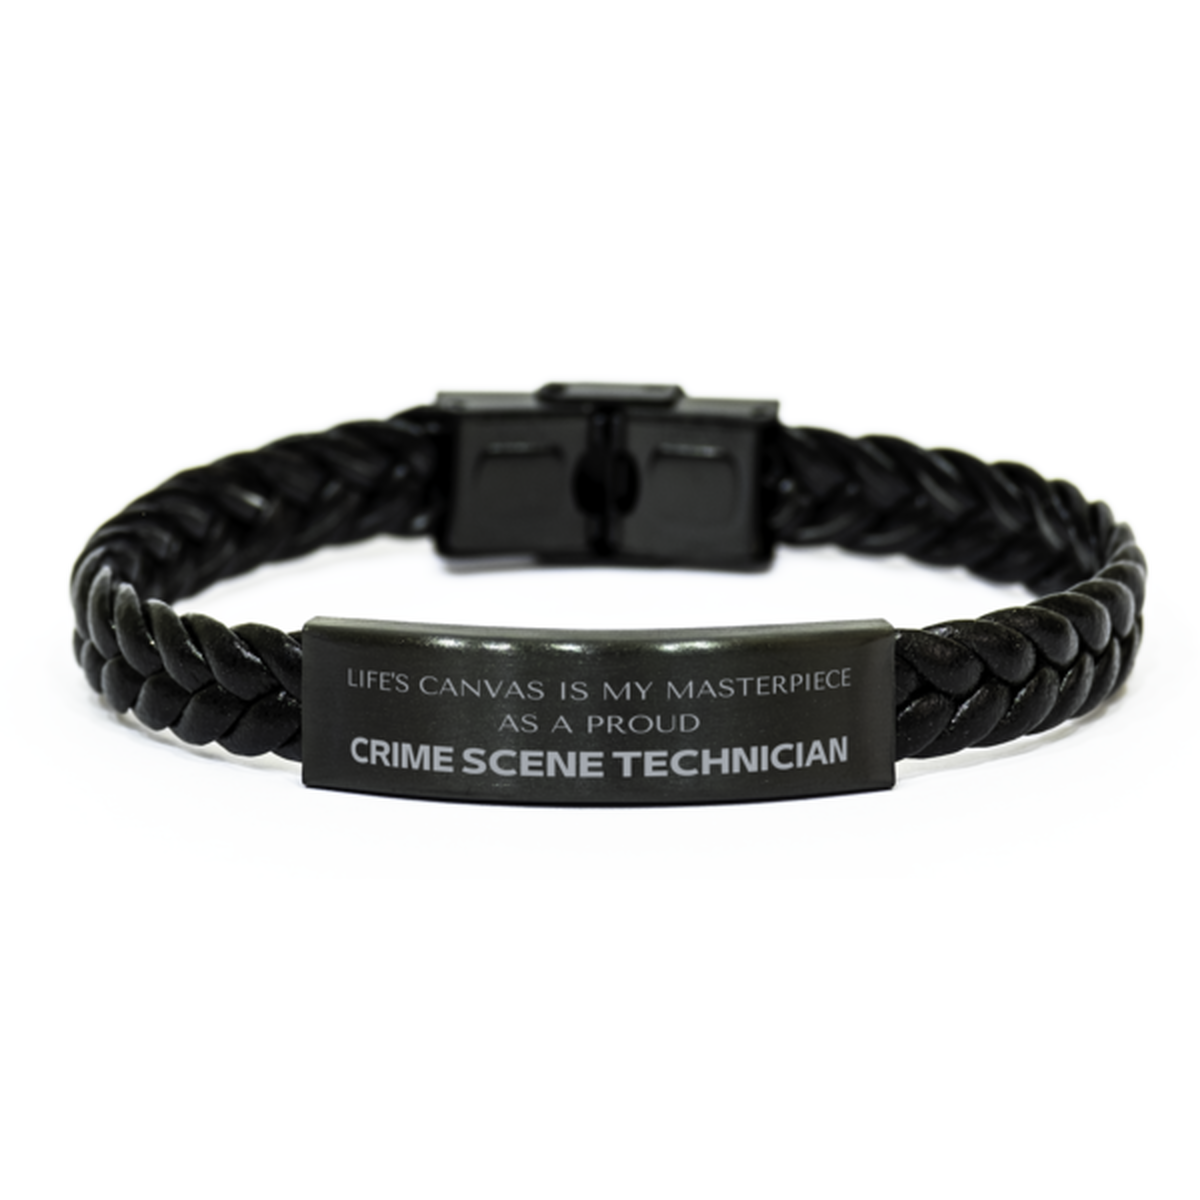 Proud Crime Scene Technician Gifts, Life's canvas is my masterpiece, Epic Birthday Christmas Unique Braided Leather Bracelet For Crime Scene Technician, Coworkers, Men, Women, Friends